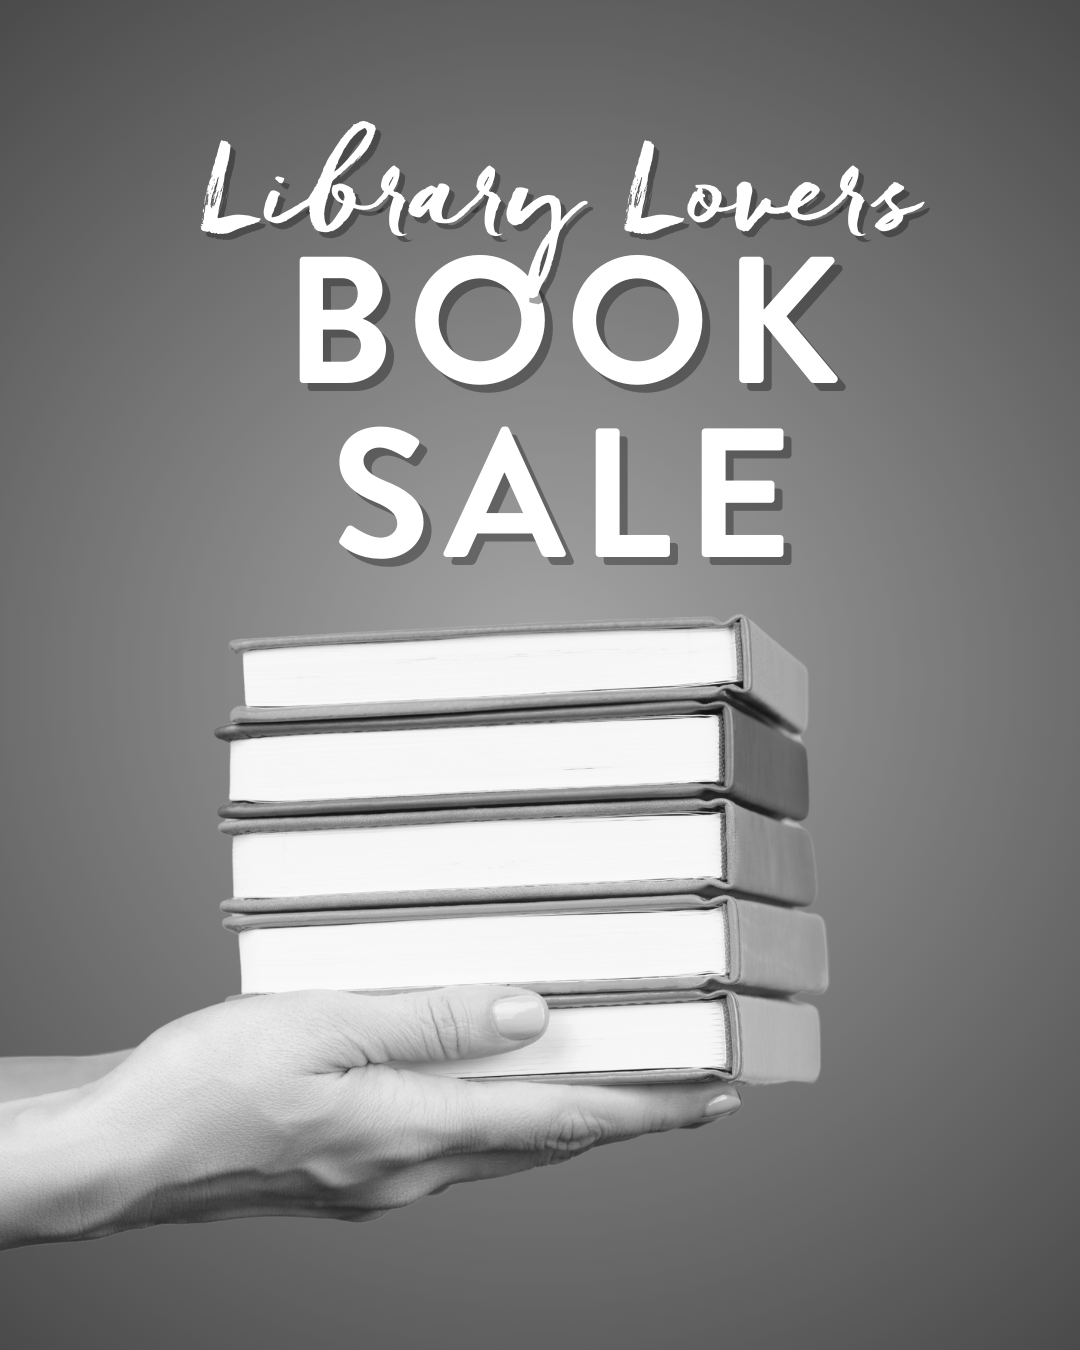 Wollondilly Library Book Sale